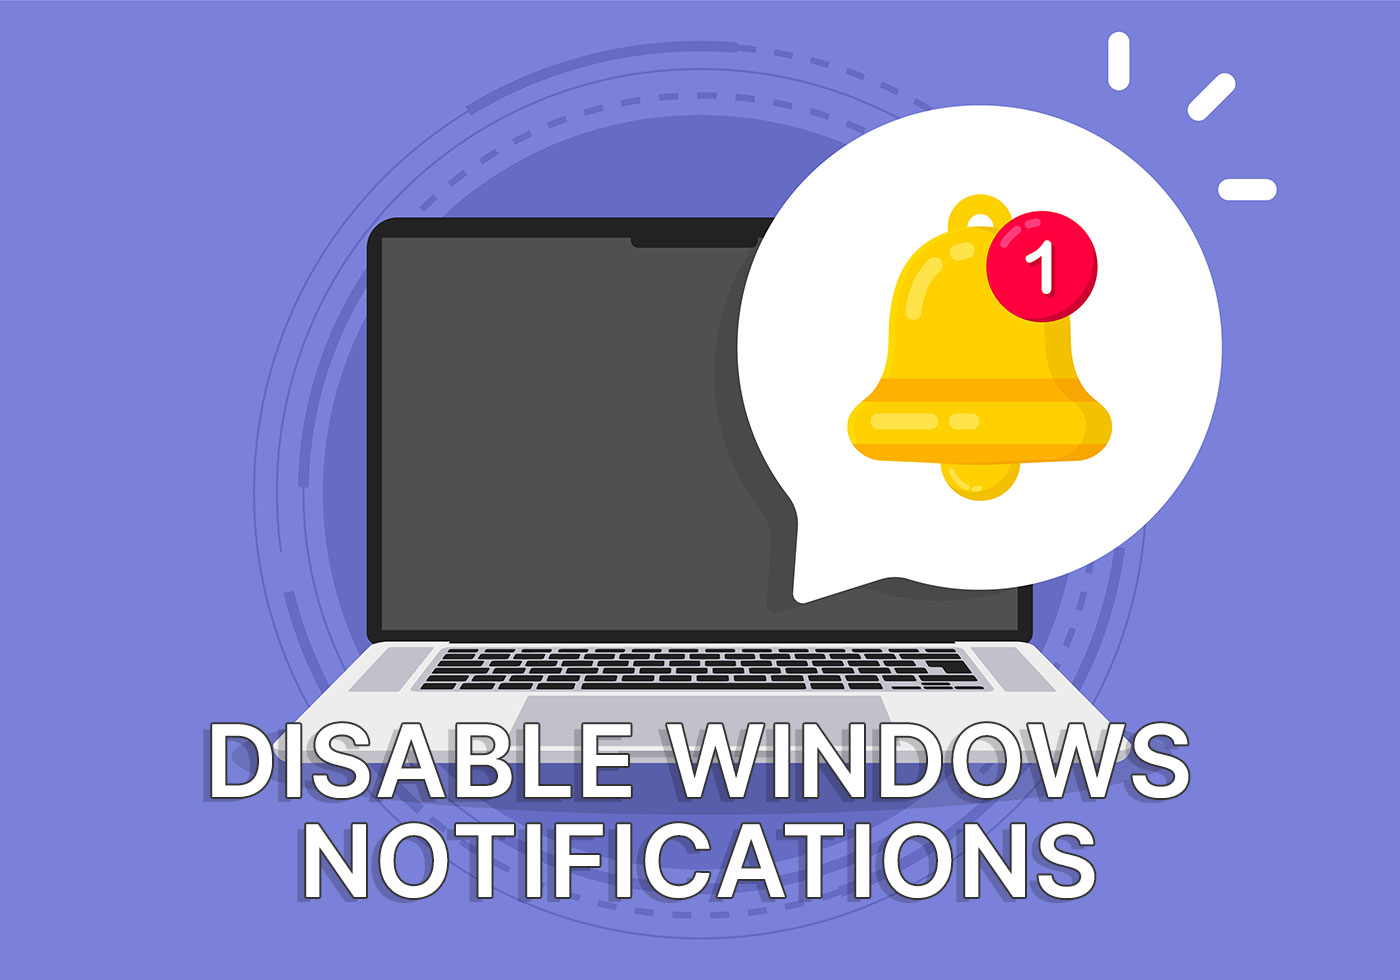 disable windows notifications for distraction free work